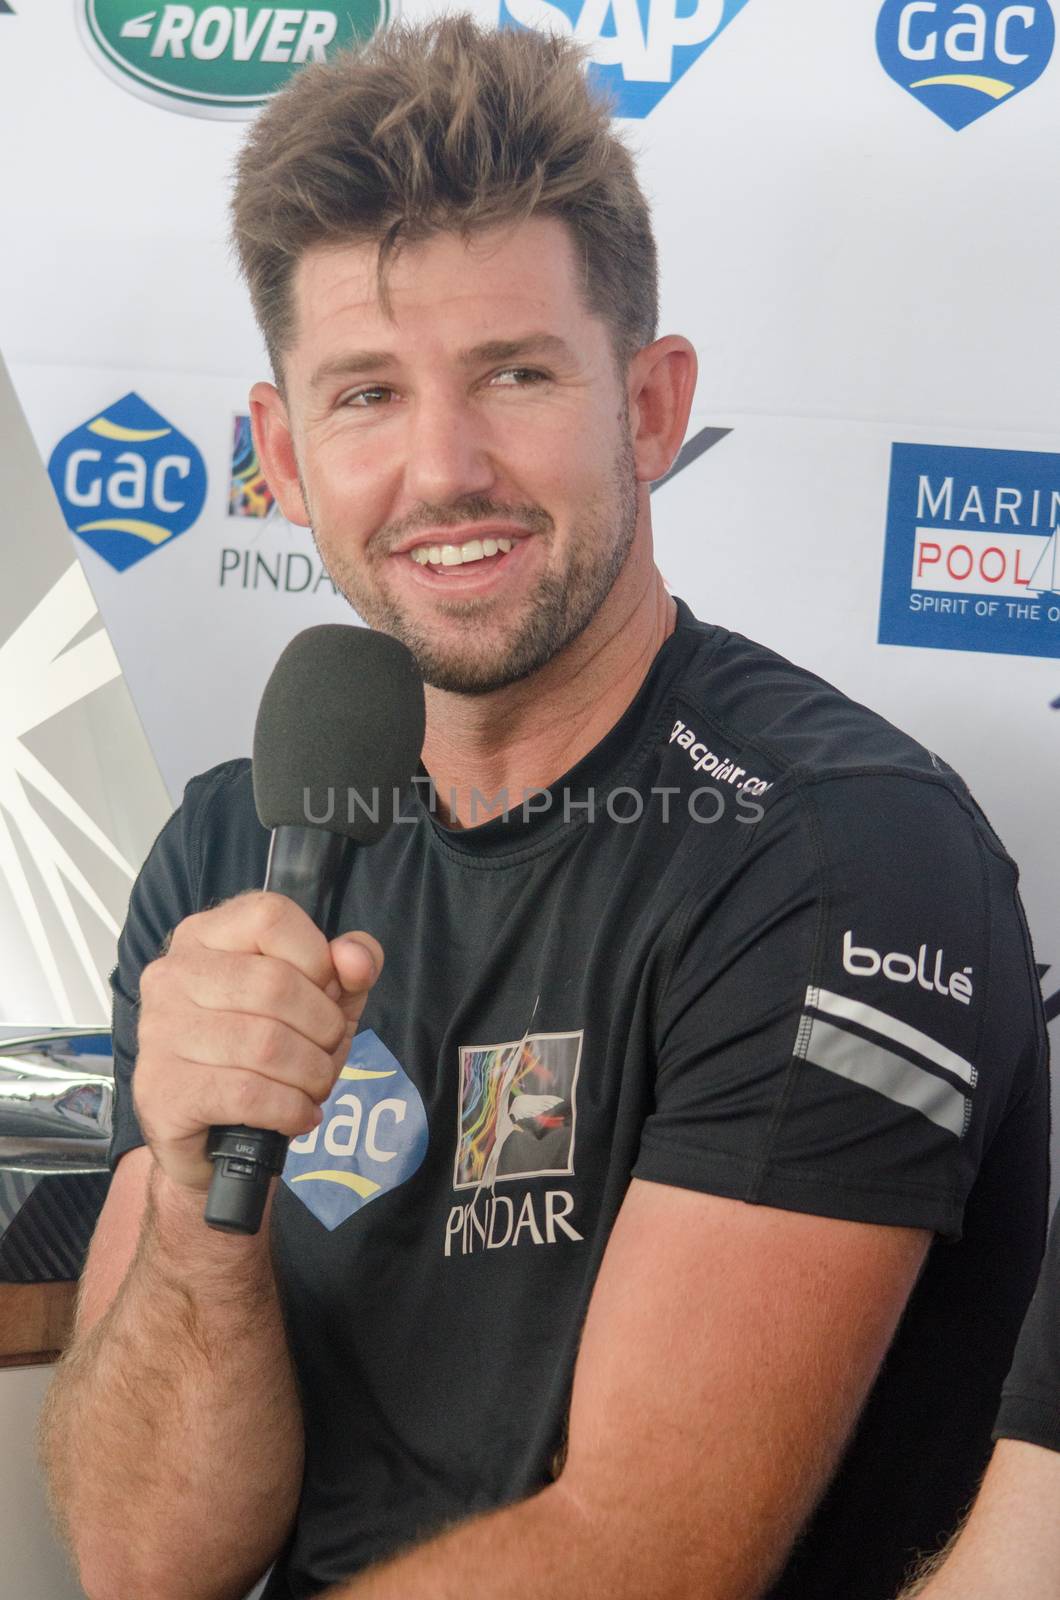 AUSTRALIA, Sydney: The Extreme Sailing Series has kicked off with a press conference in Sydney on December 10, 2015. The racing takes place over four days from 10-13 December, 2015. Seve Jarvin pictured.